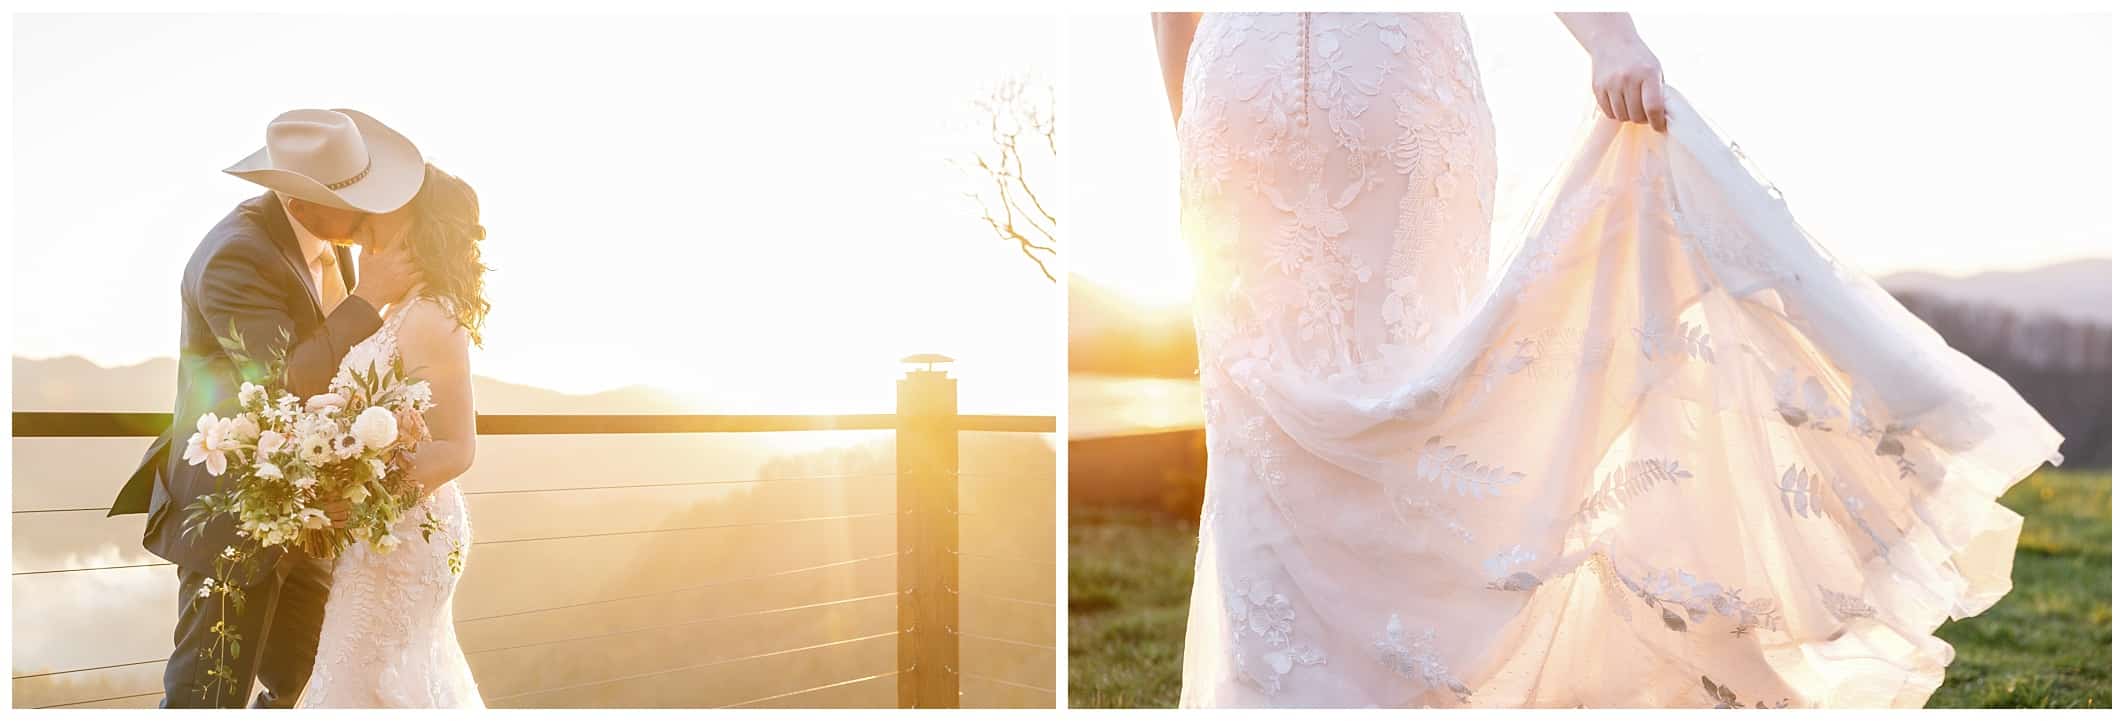 Wedding photos during the golden hour at mountain views. Brides dress with golden light shining through it.